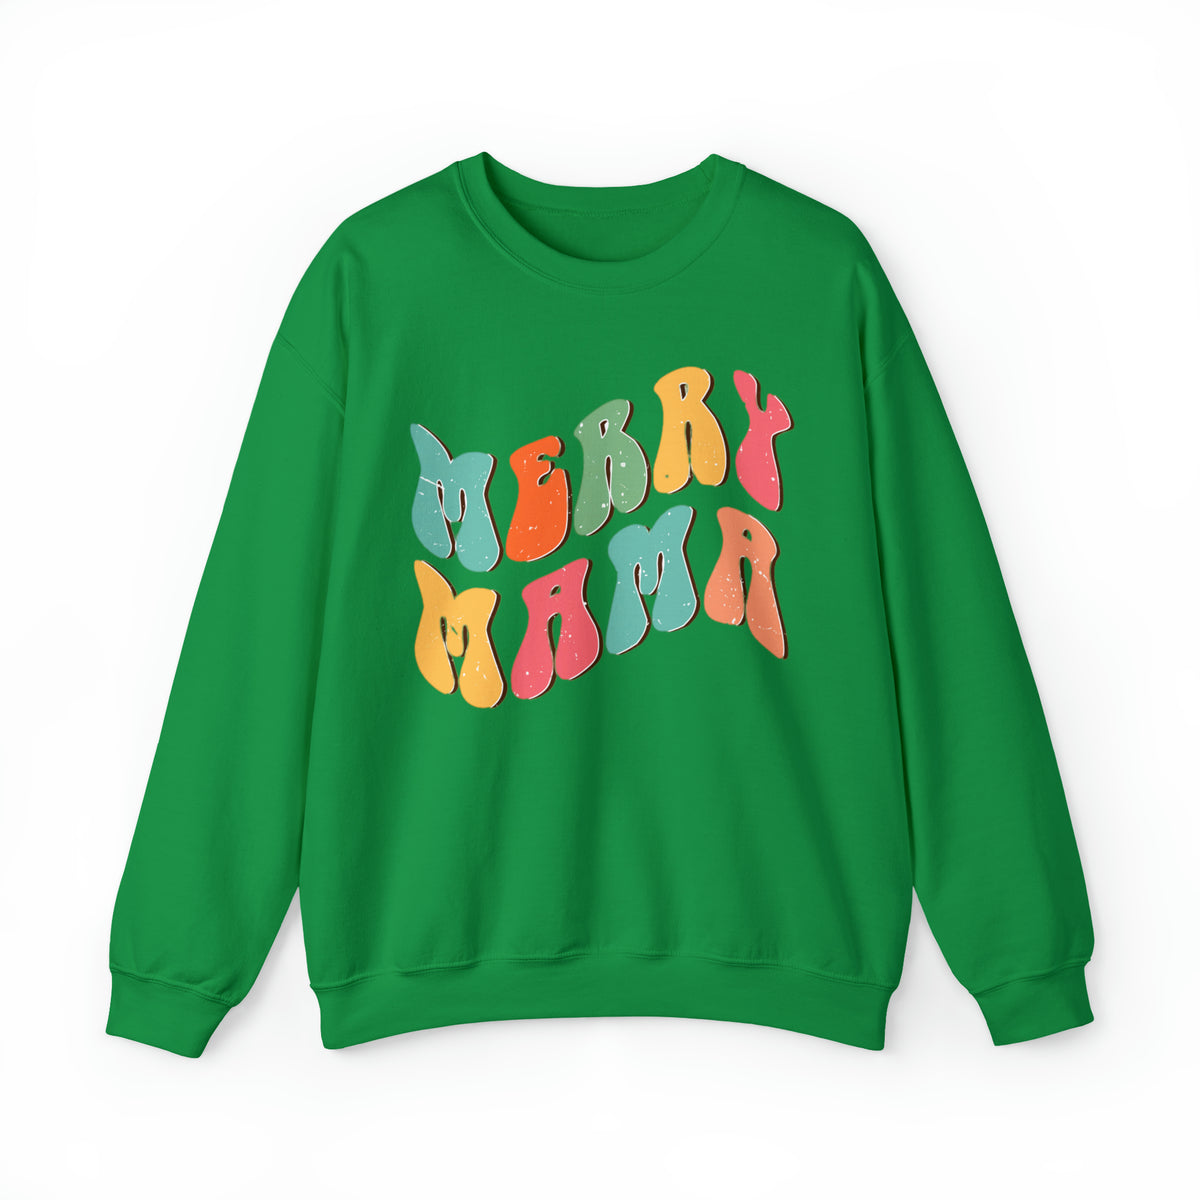 Merry Mama Christmas Sweatshirt, Christmas Sweater, Christmas Party Outfit, Holiday Gifts, Funny Christmas Sweater, Ugly Christmas Sweater, Holiday Sweatshirt for mom, Christmas Sweater for mom